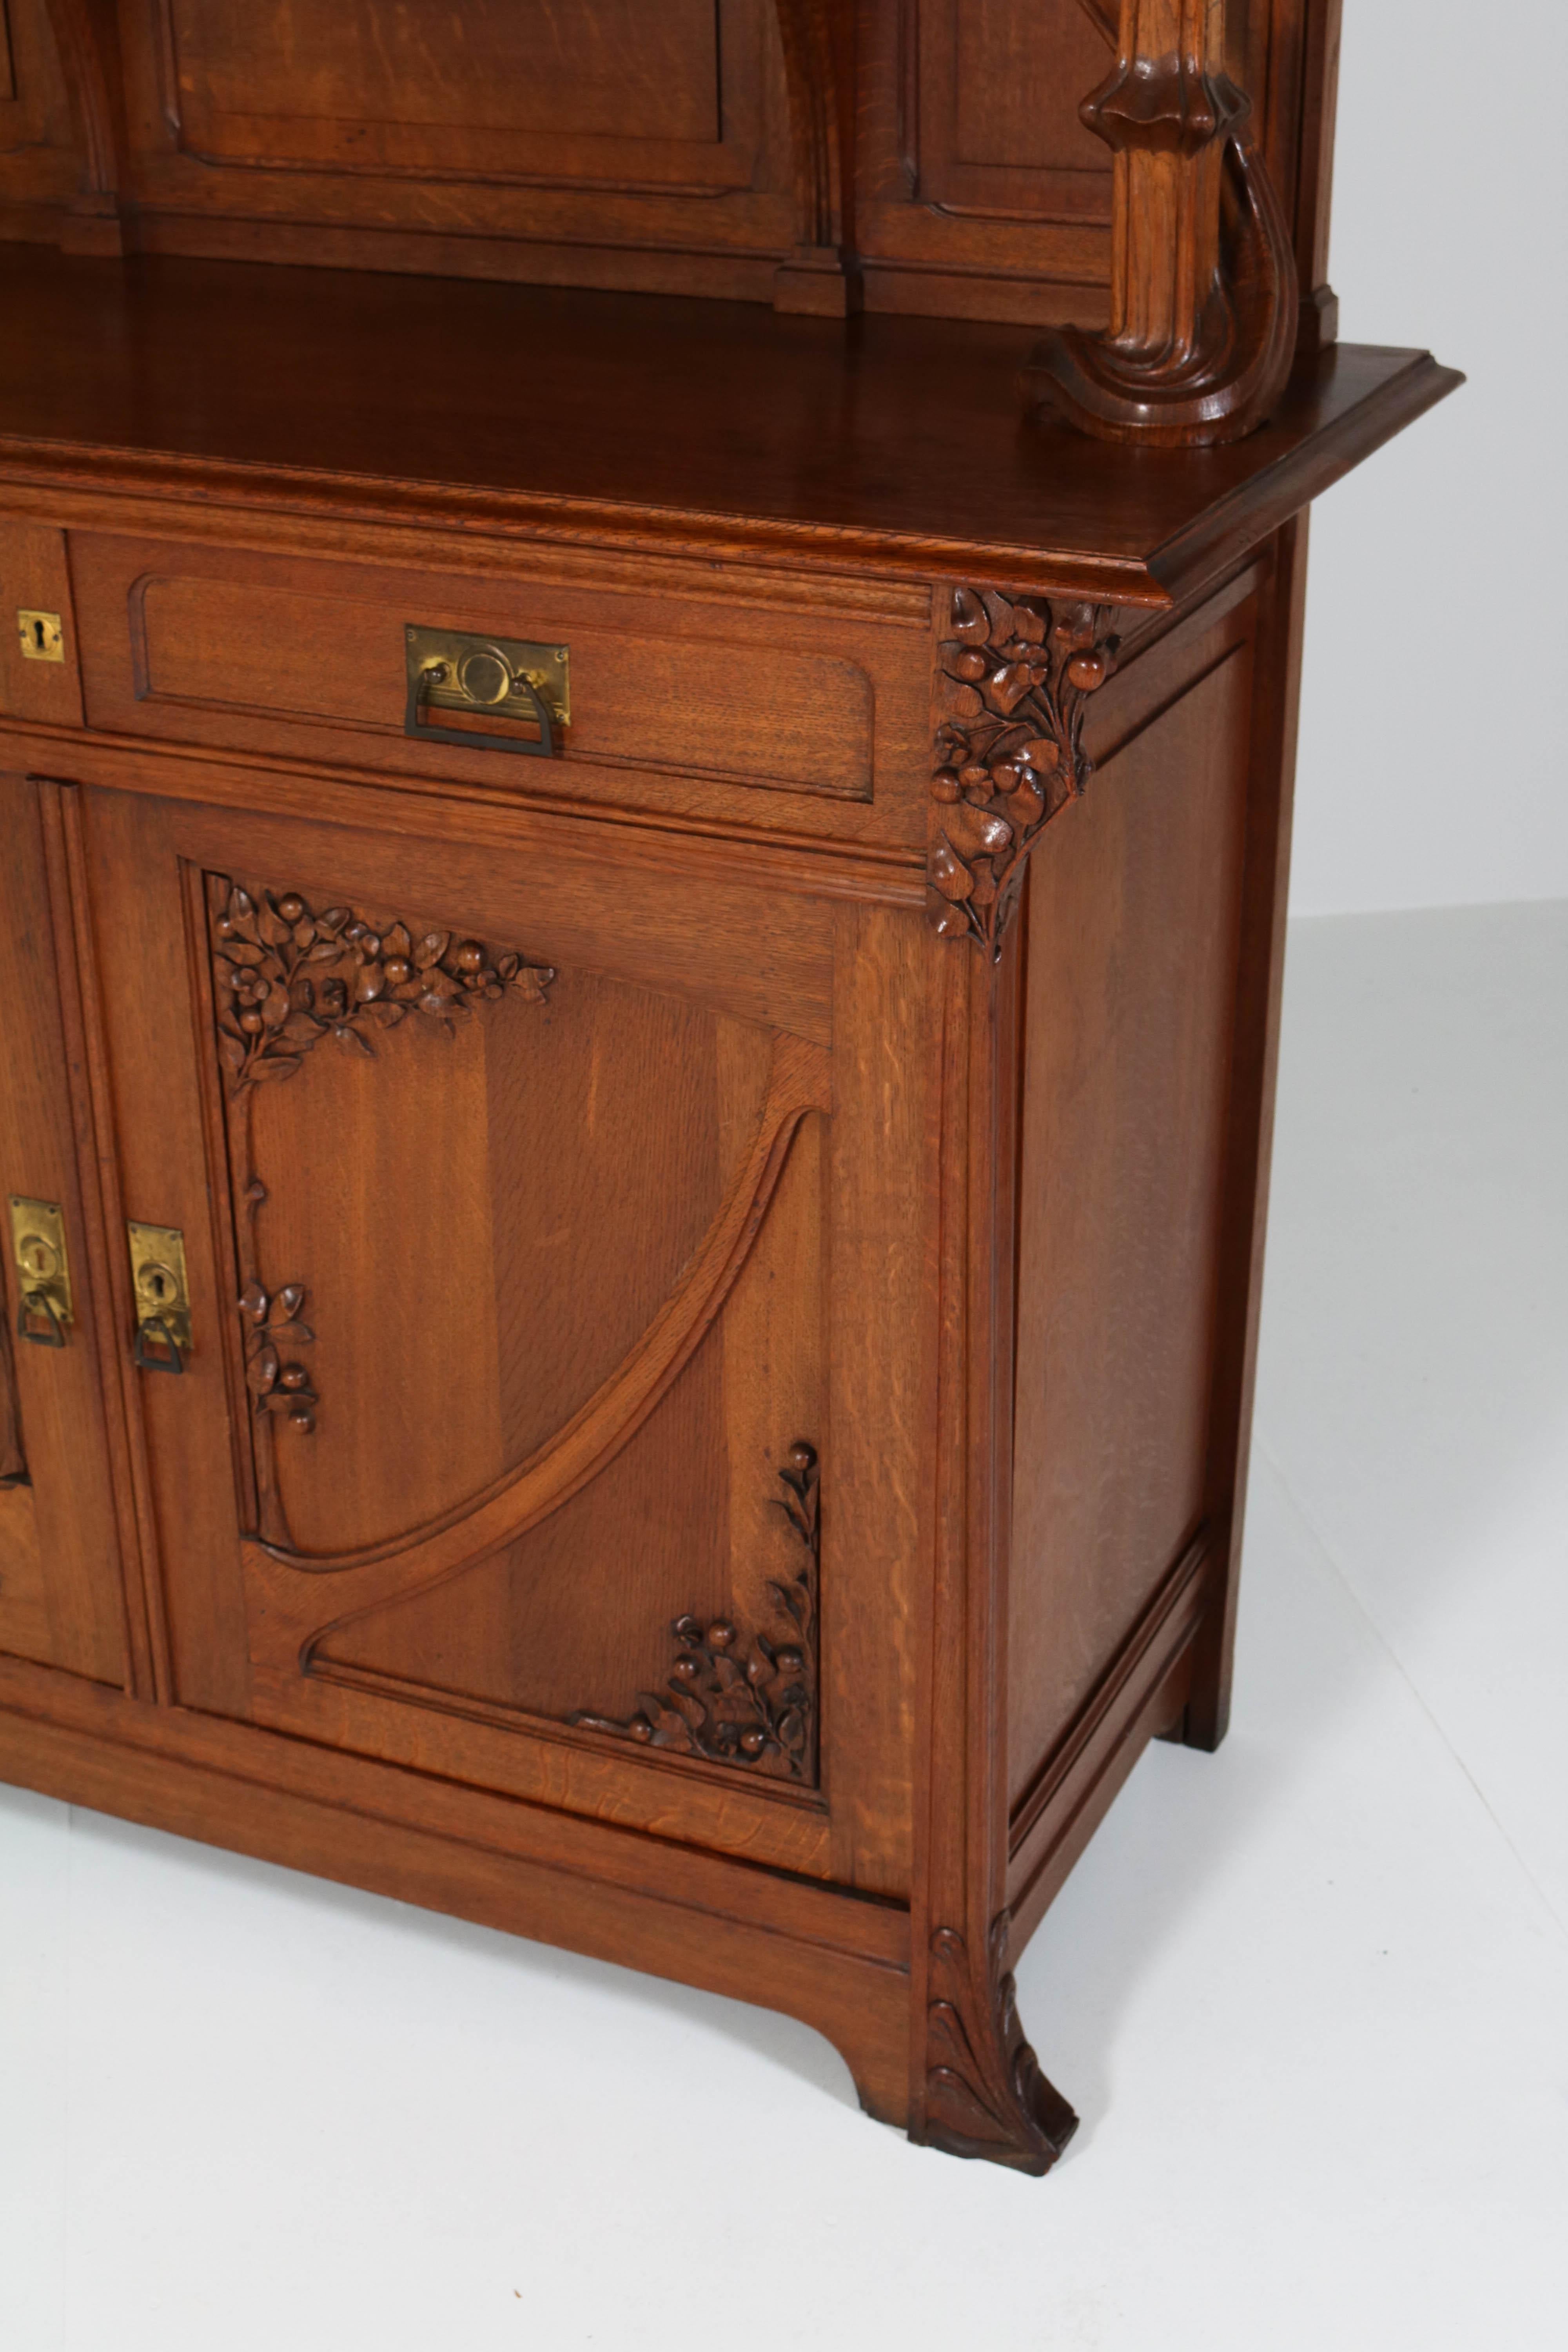 Beveled Oak French Art Nouveau Buffet Attributed to Jacques Gruber, 1904